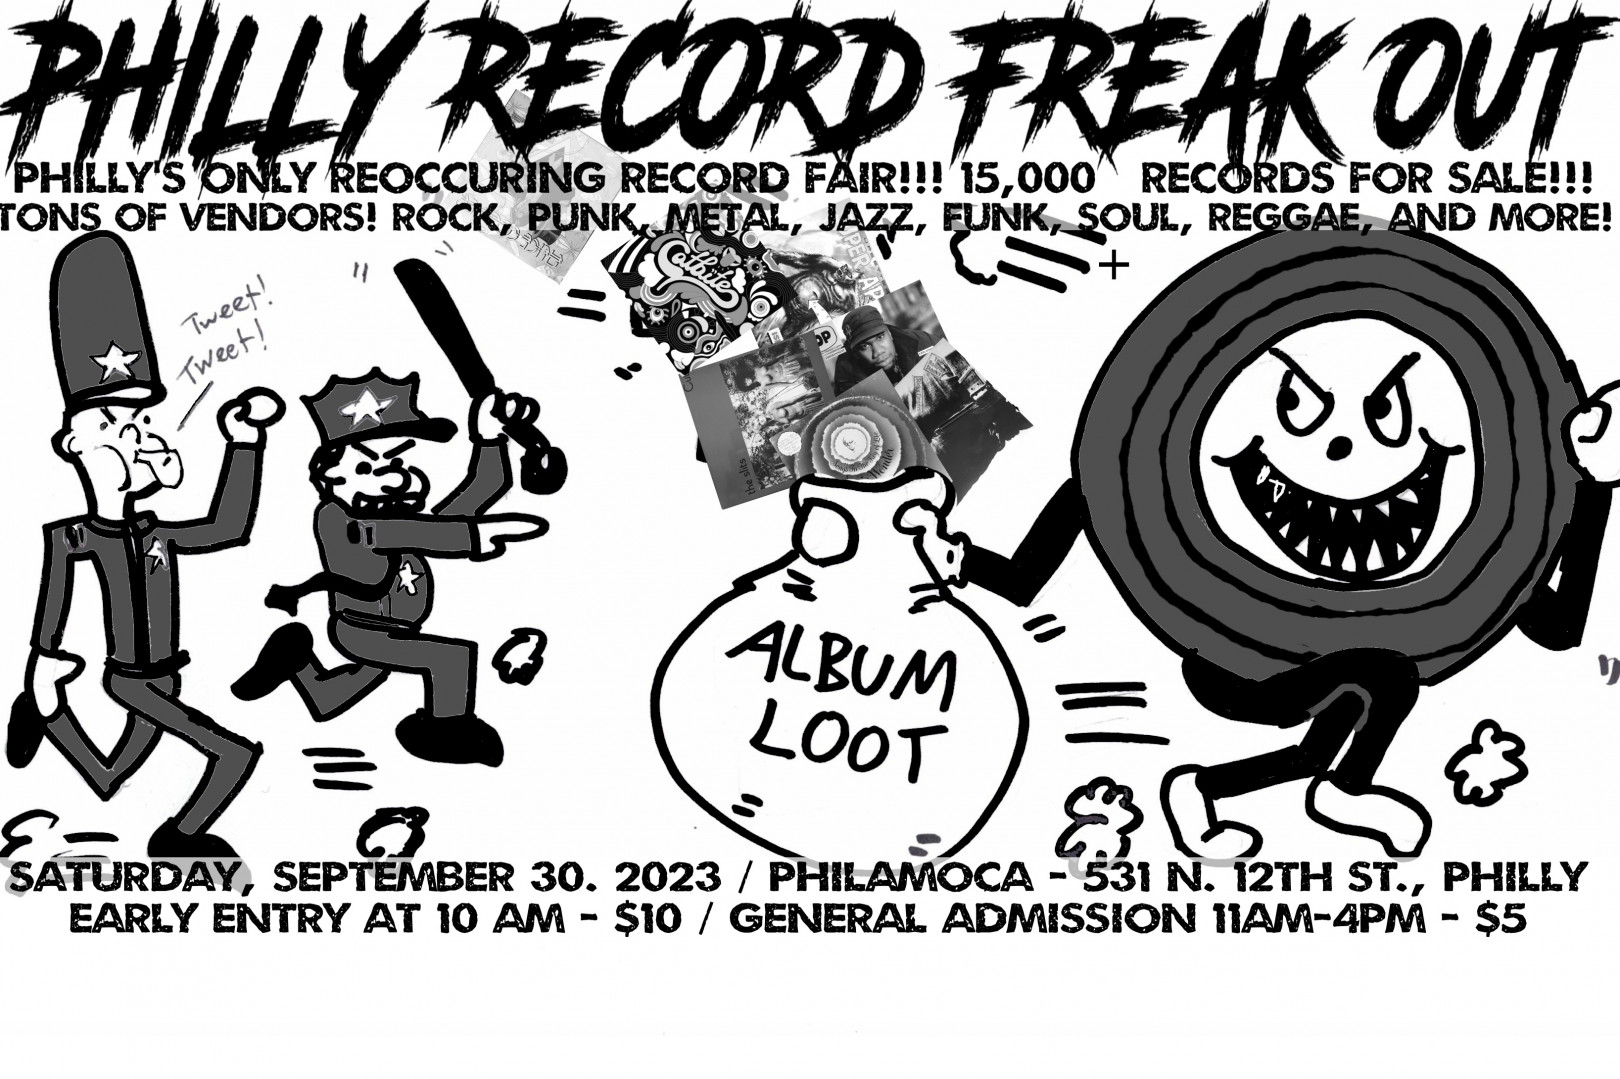 The Philly Record Freak out is TOMORROW 10AM-4PM!!!!